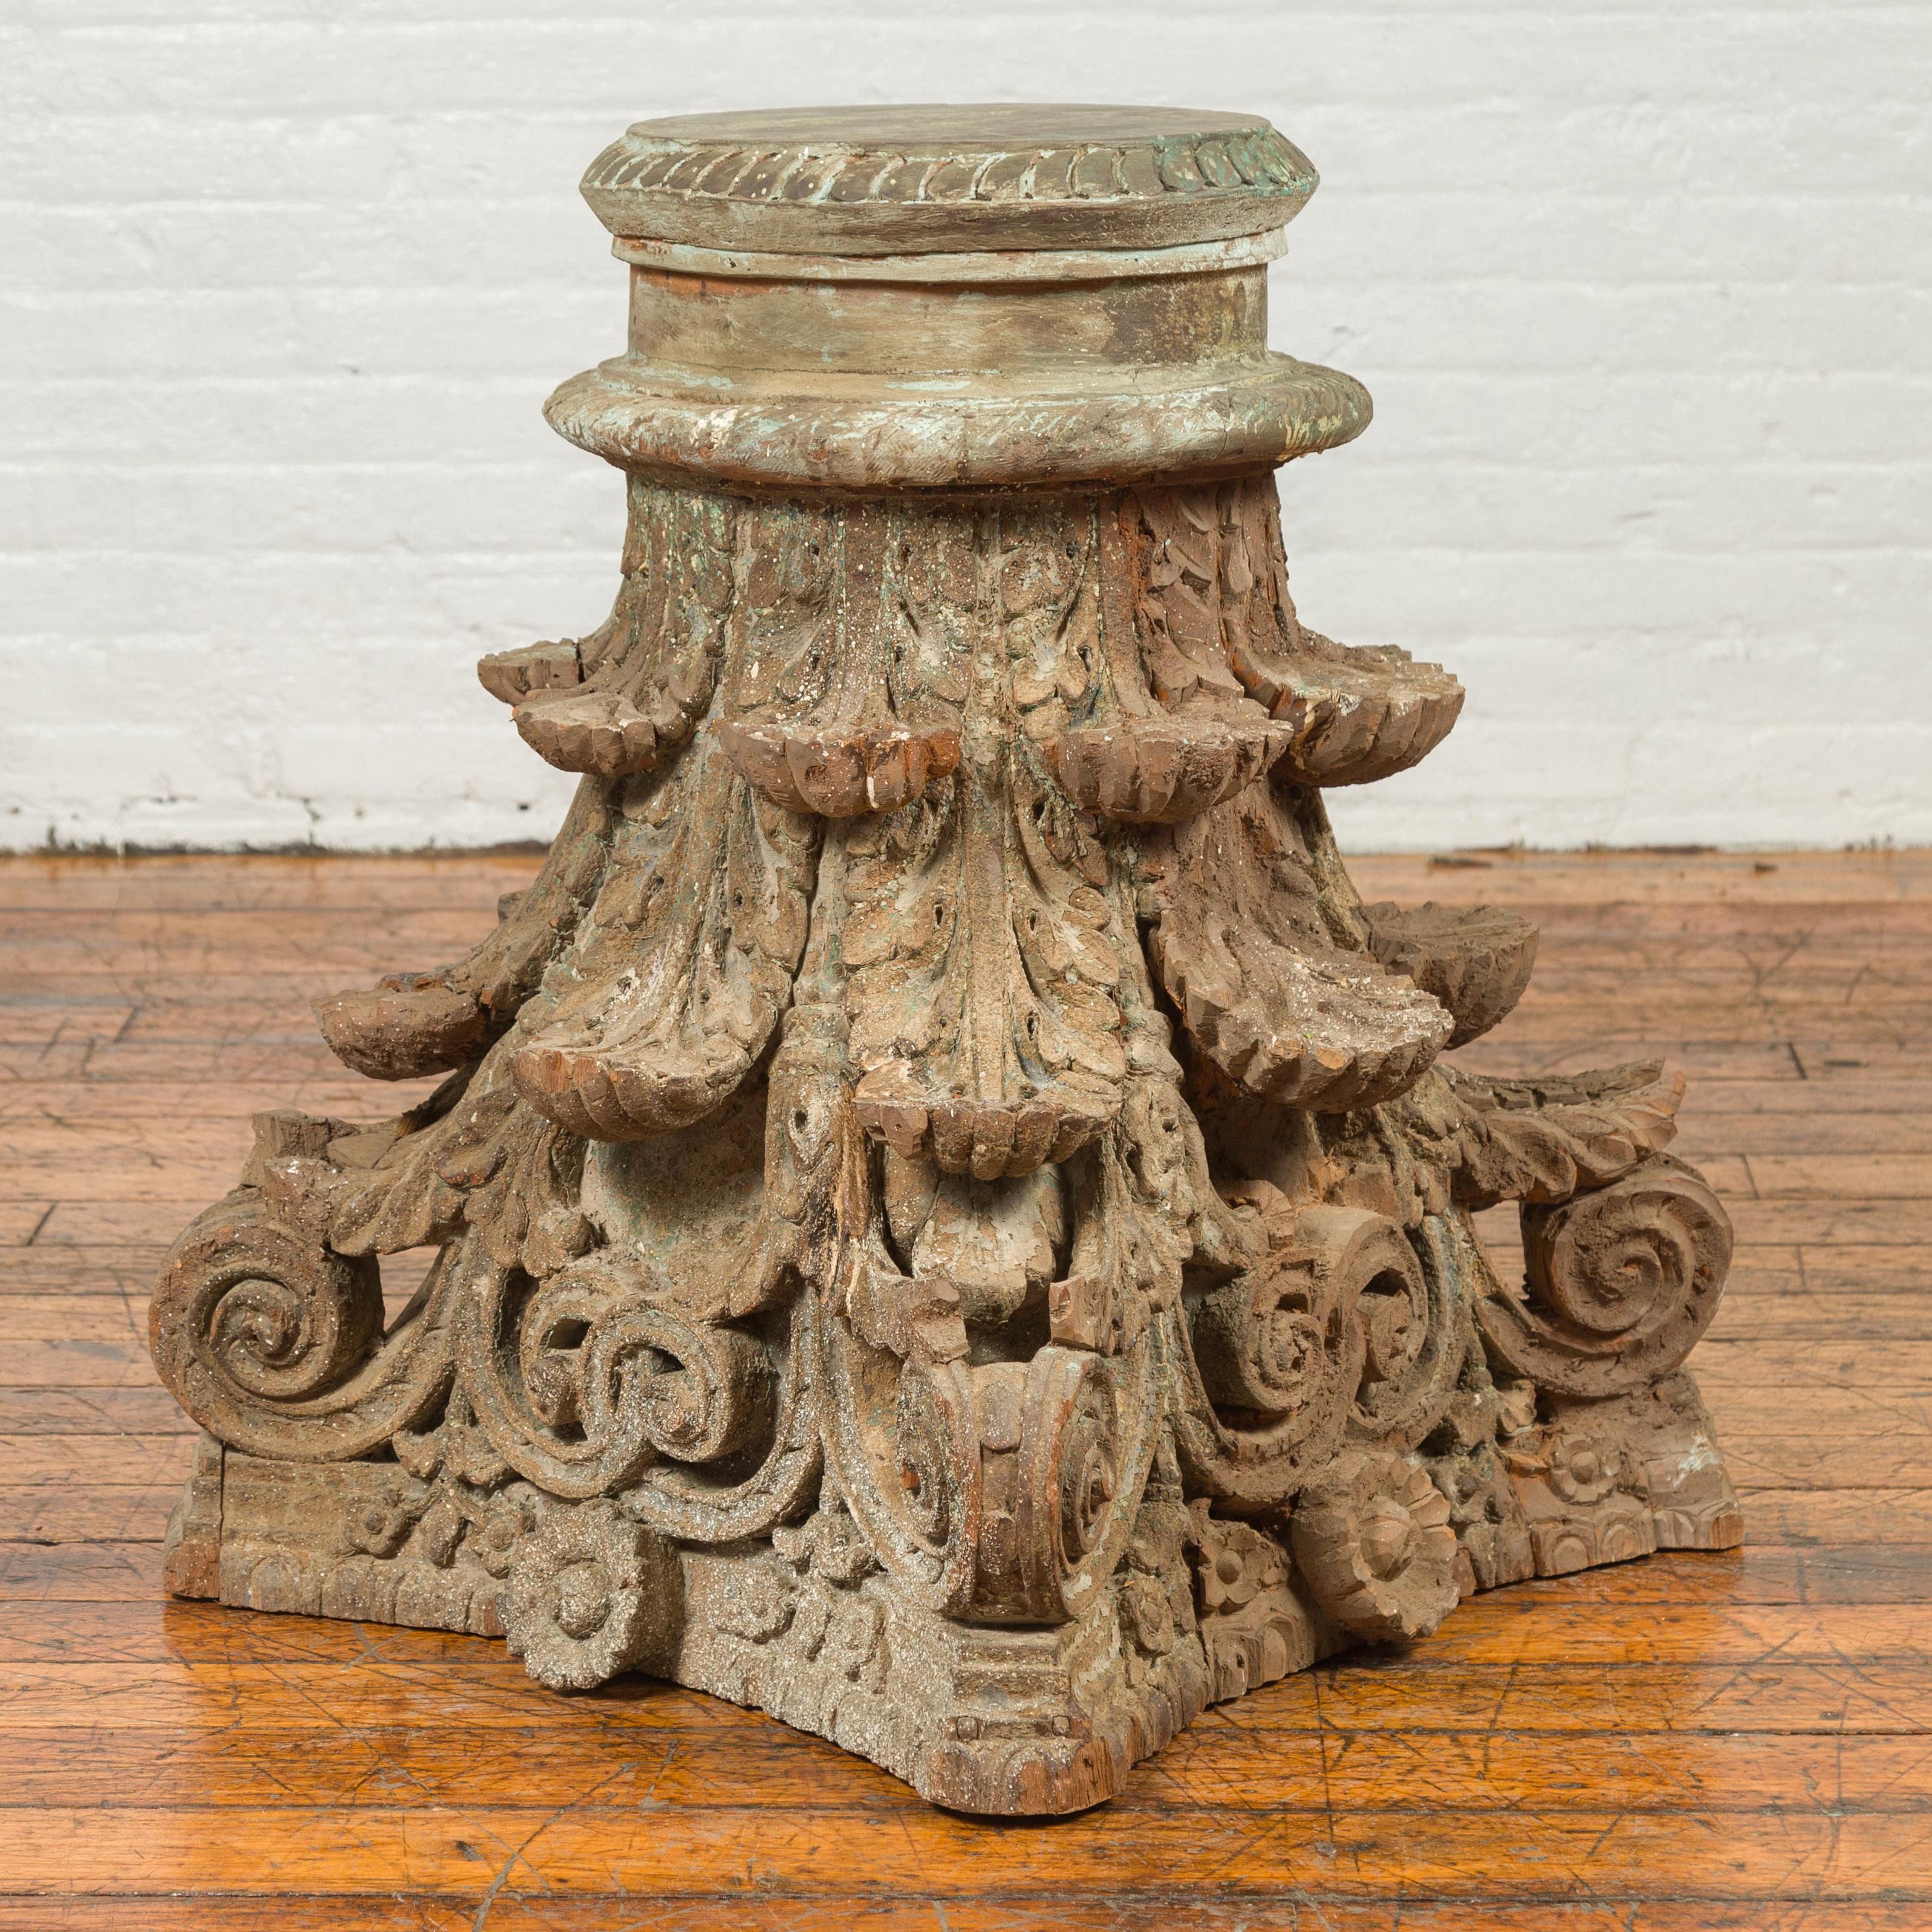 Antique Indian Corinthian Temple Capital Carving with Distressed Patina For Sale 2